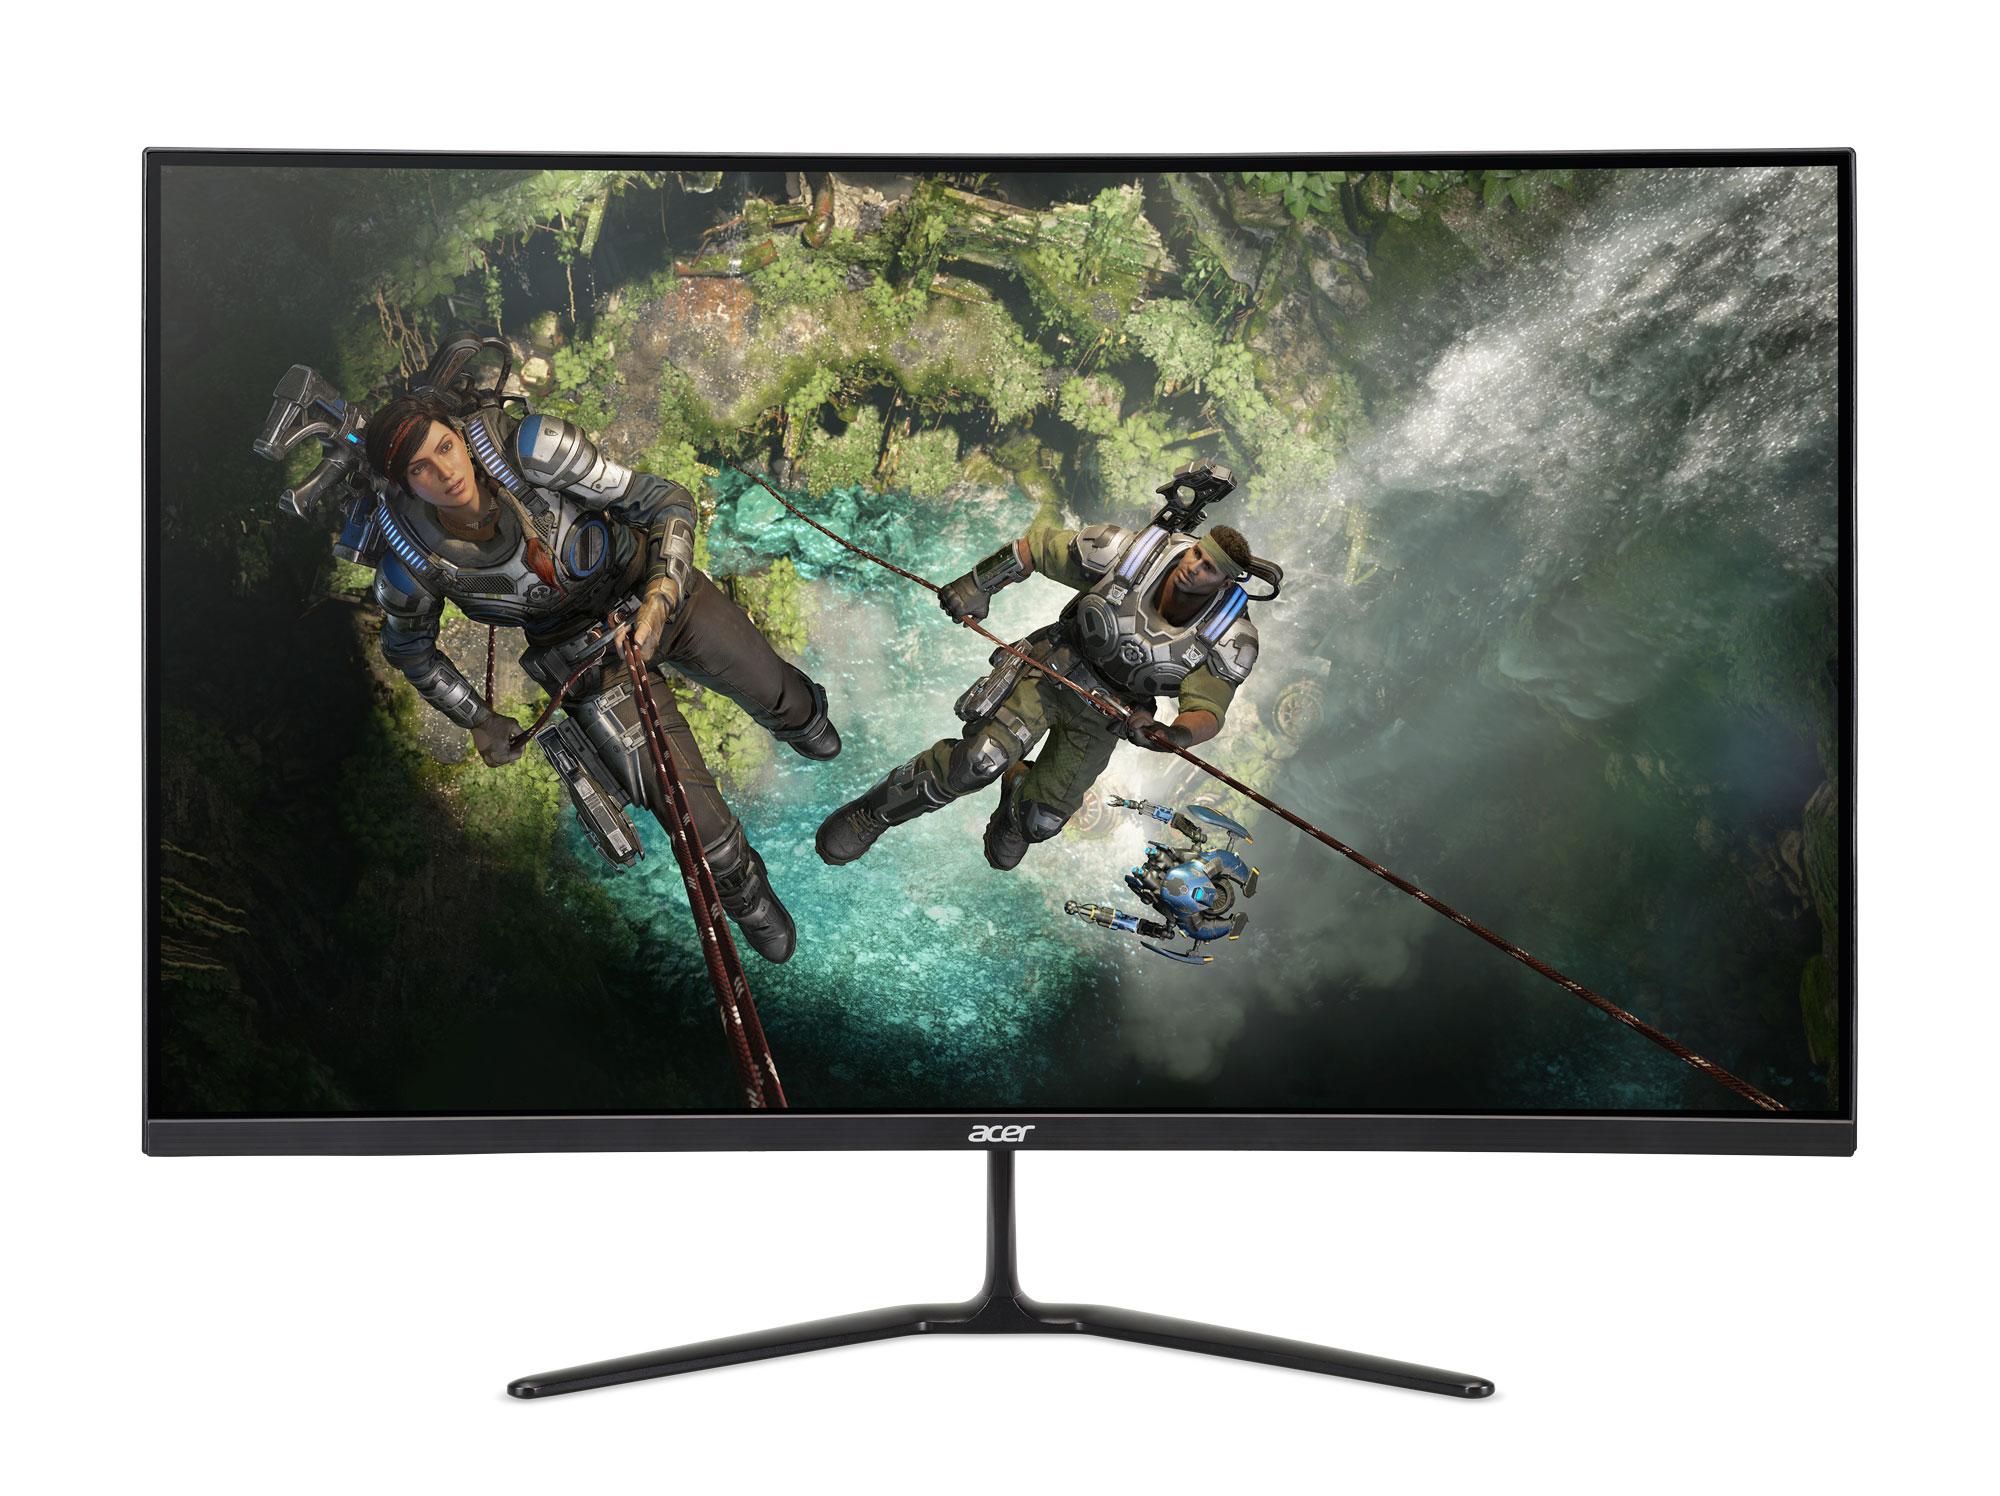 31.5in Acer ED320QR Sbiipx Curved 1080p FreeSync VA Monitor for $155 Shipped